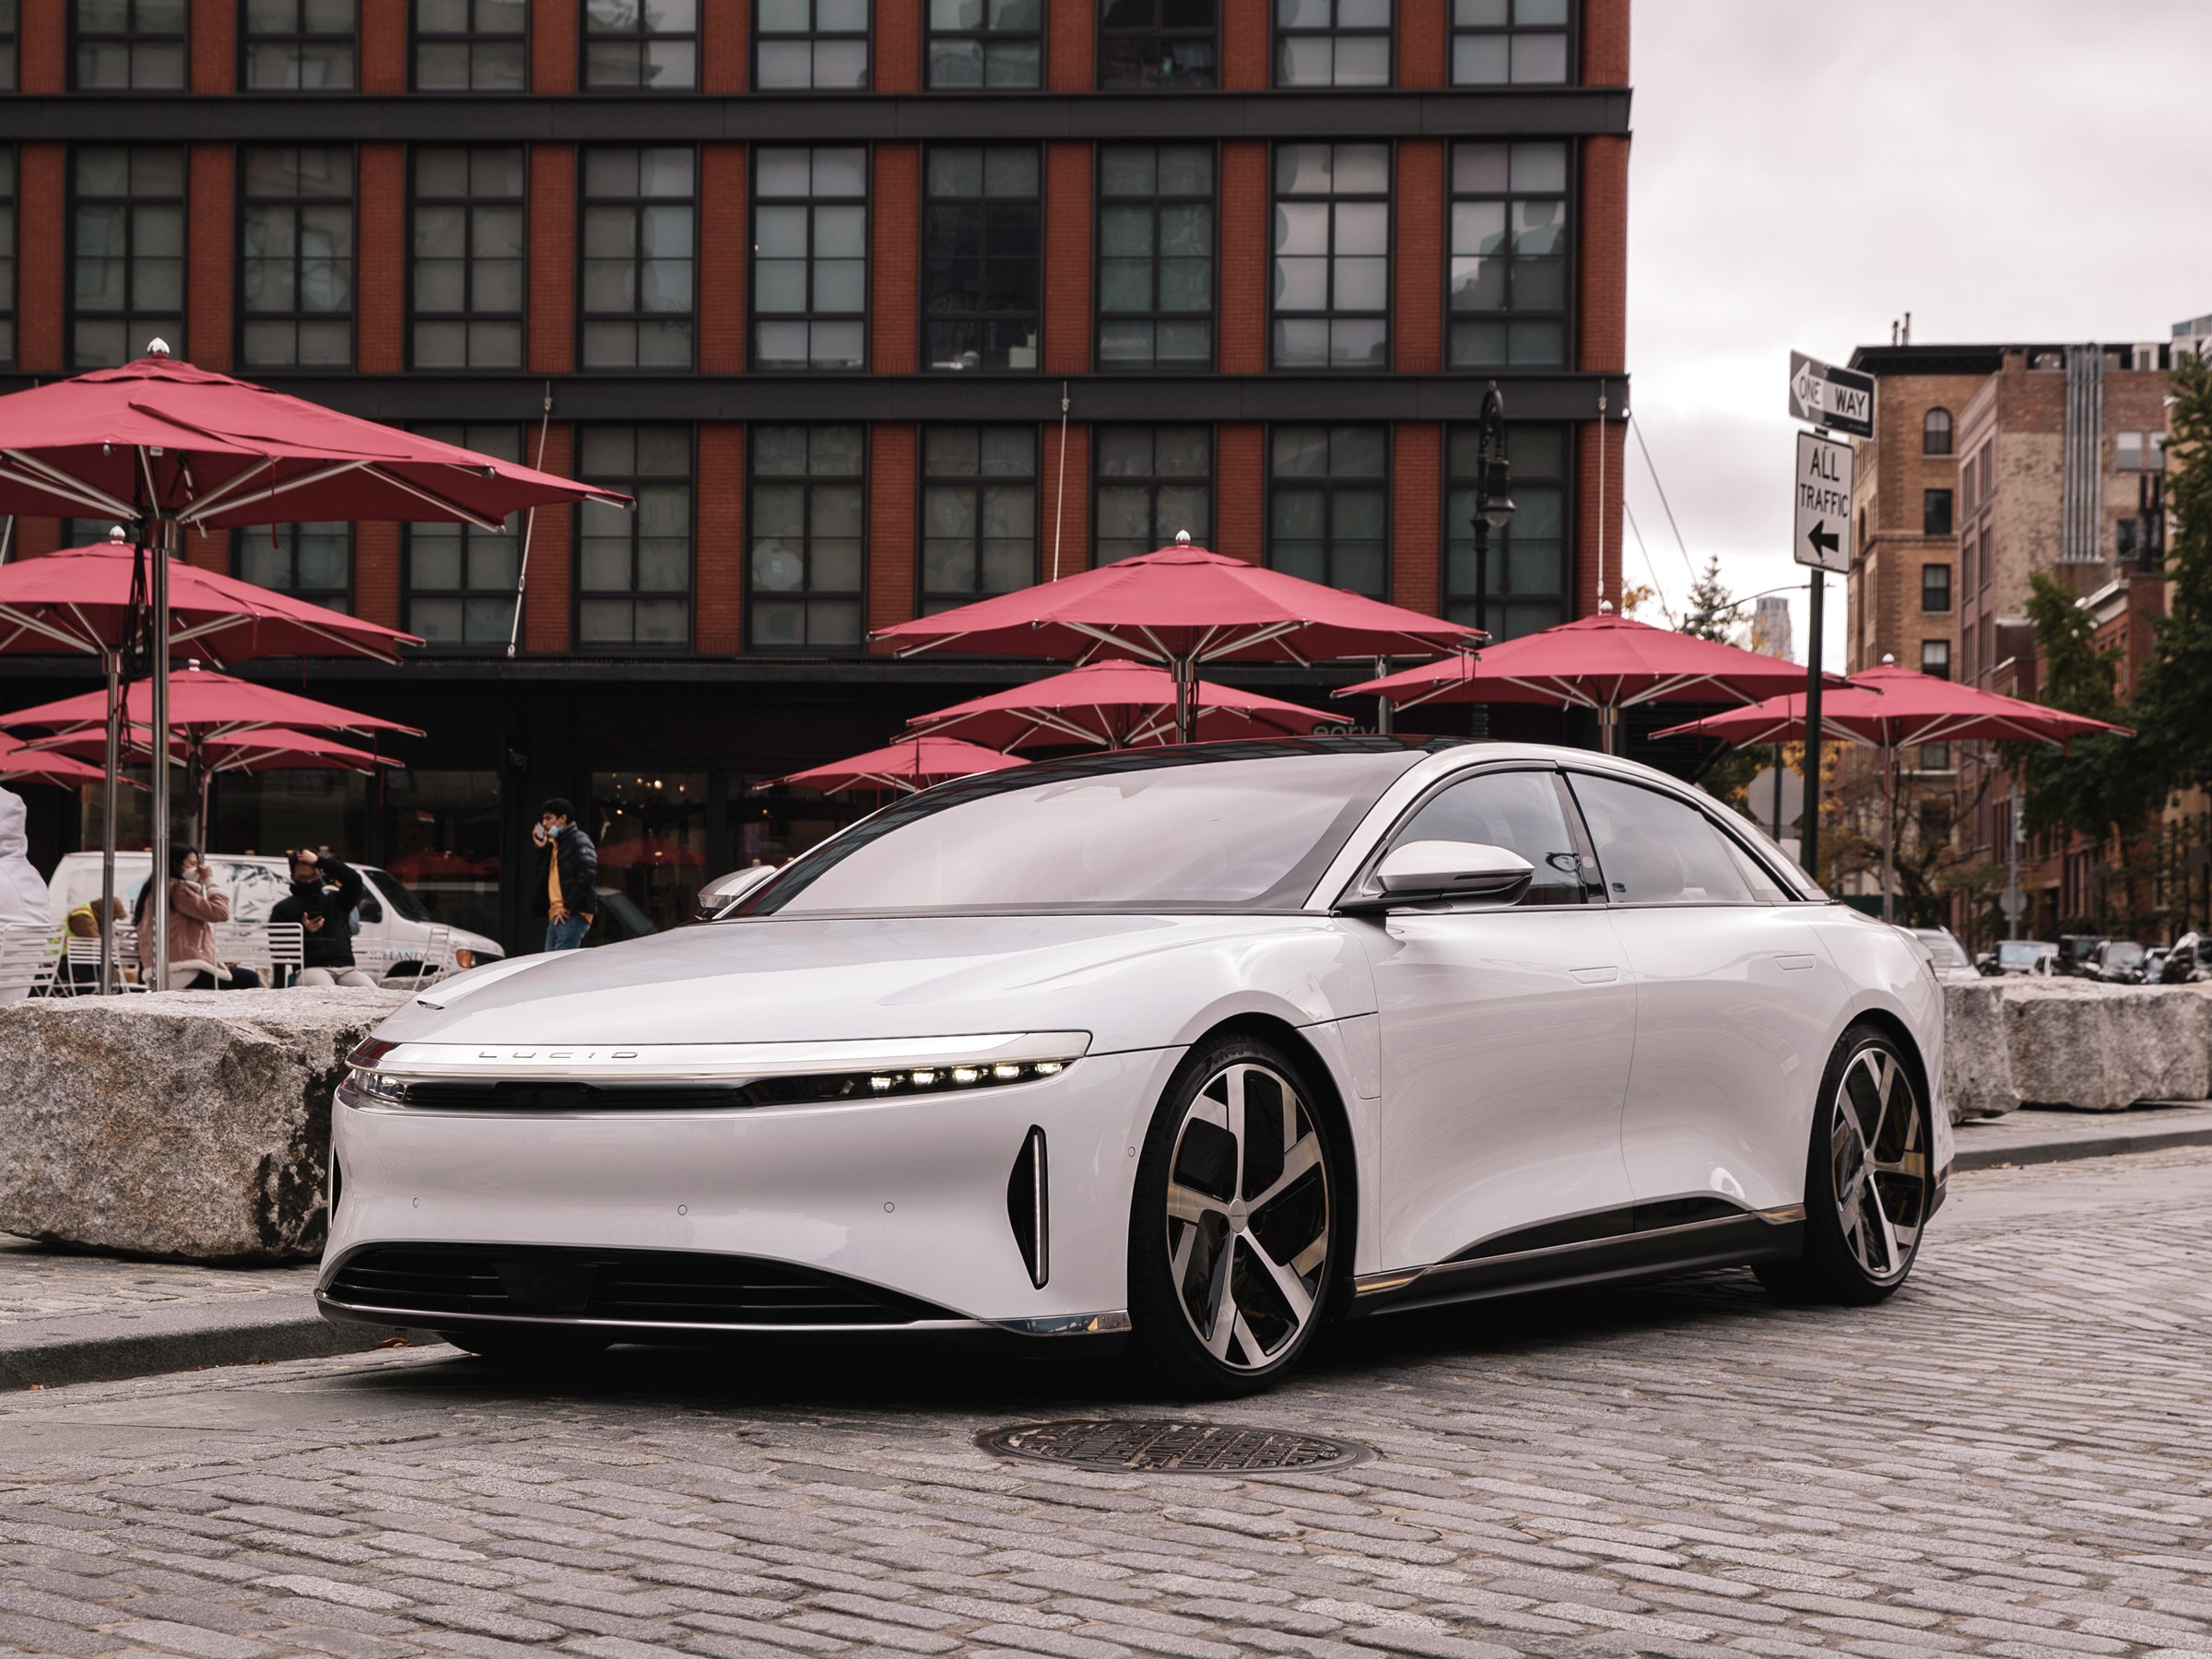 Electric Car Brand Lucid Motors To Open Retail Showroom In Vancouver